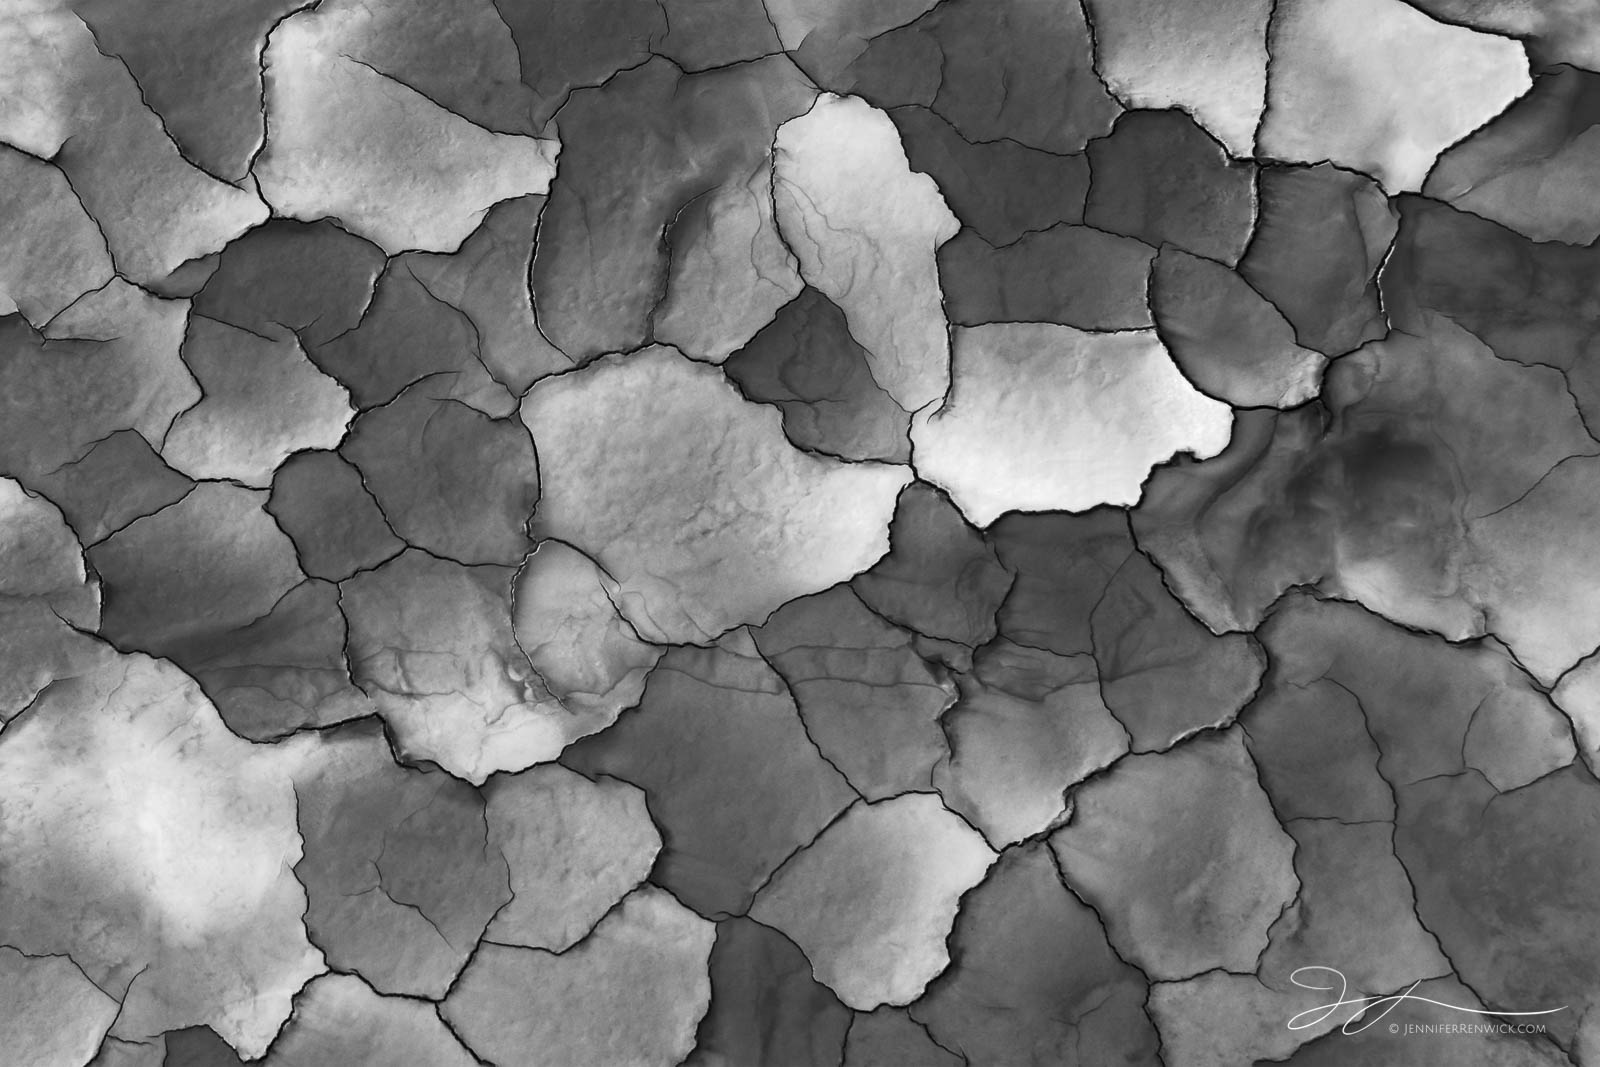 Smooth, small mud tiles make up a part of a desert playa.  This image is part of my "Desert Textures" photo project. You see...